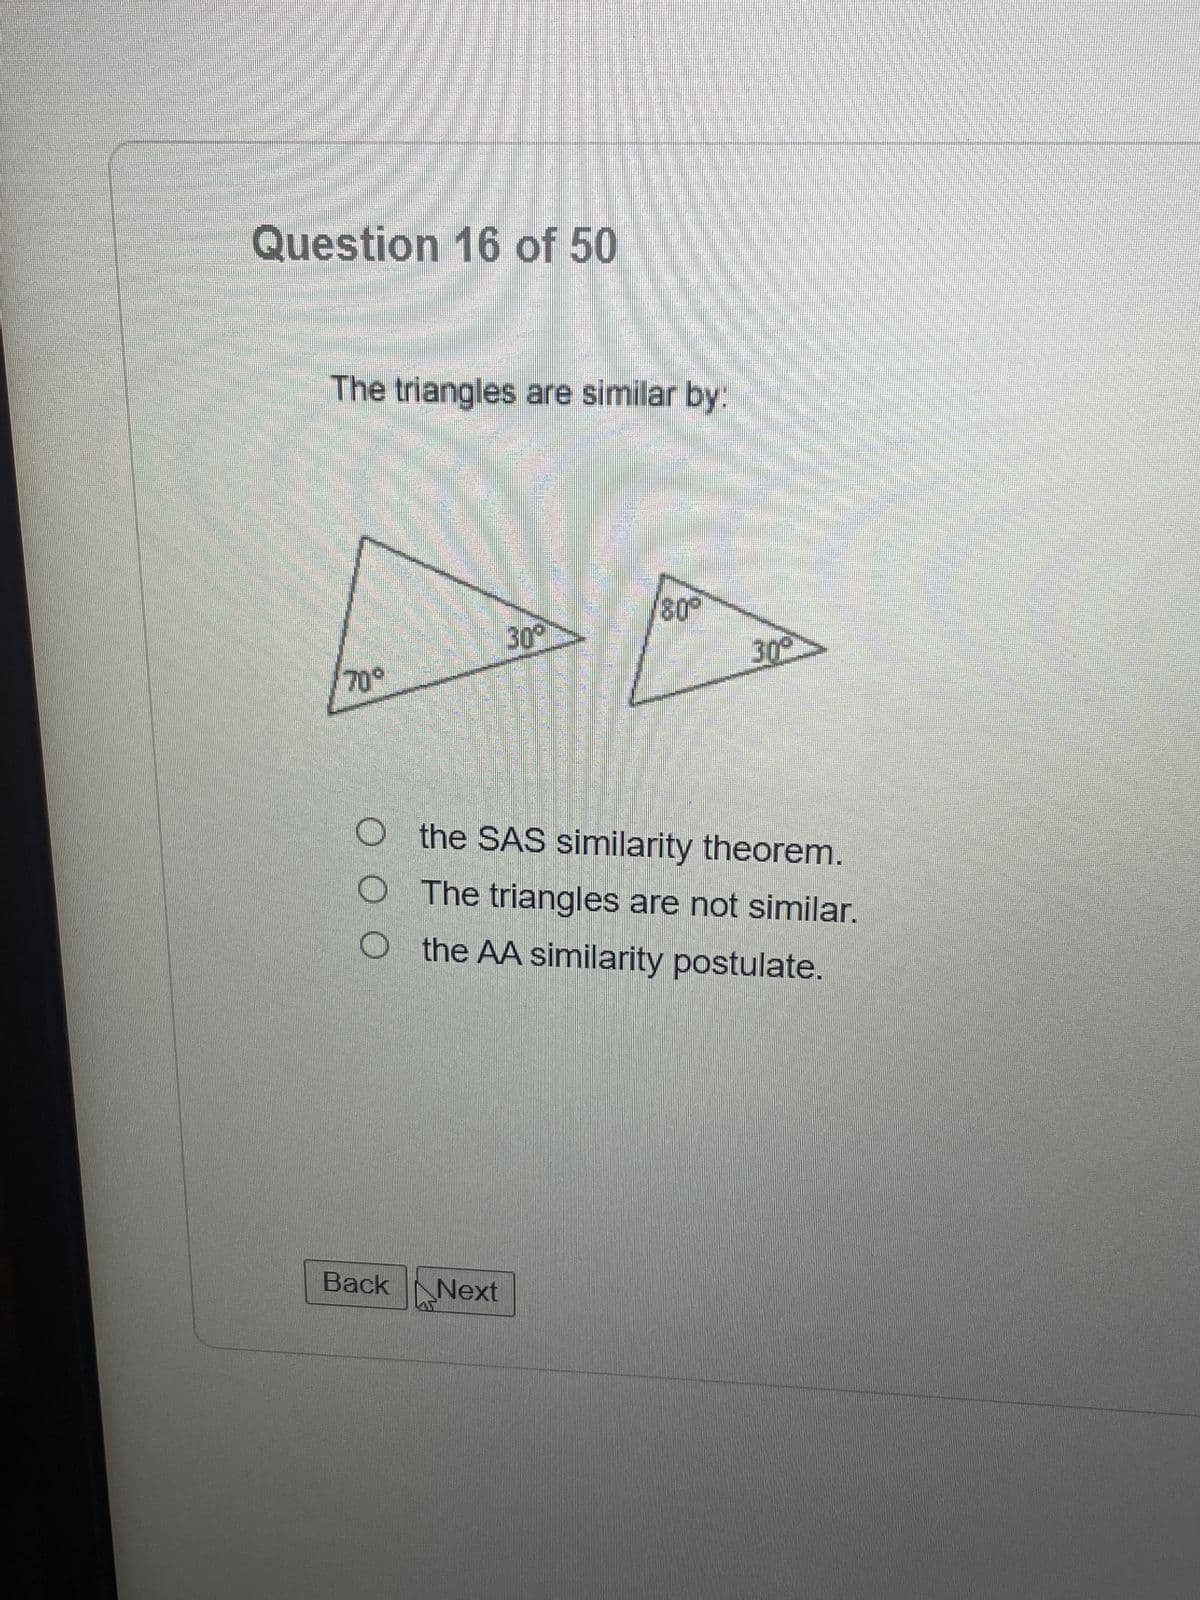 Question 16 of 50
The triangles are similar by:
70°
30°
Back Next
180°
30°
Othe SAS similarity theorem.
O The triangles are not similar.
O the AA similarity postulate.